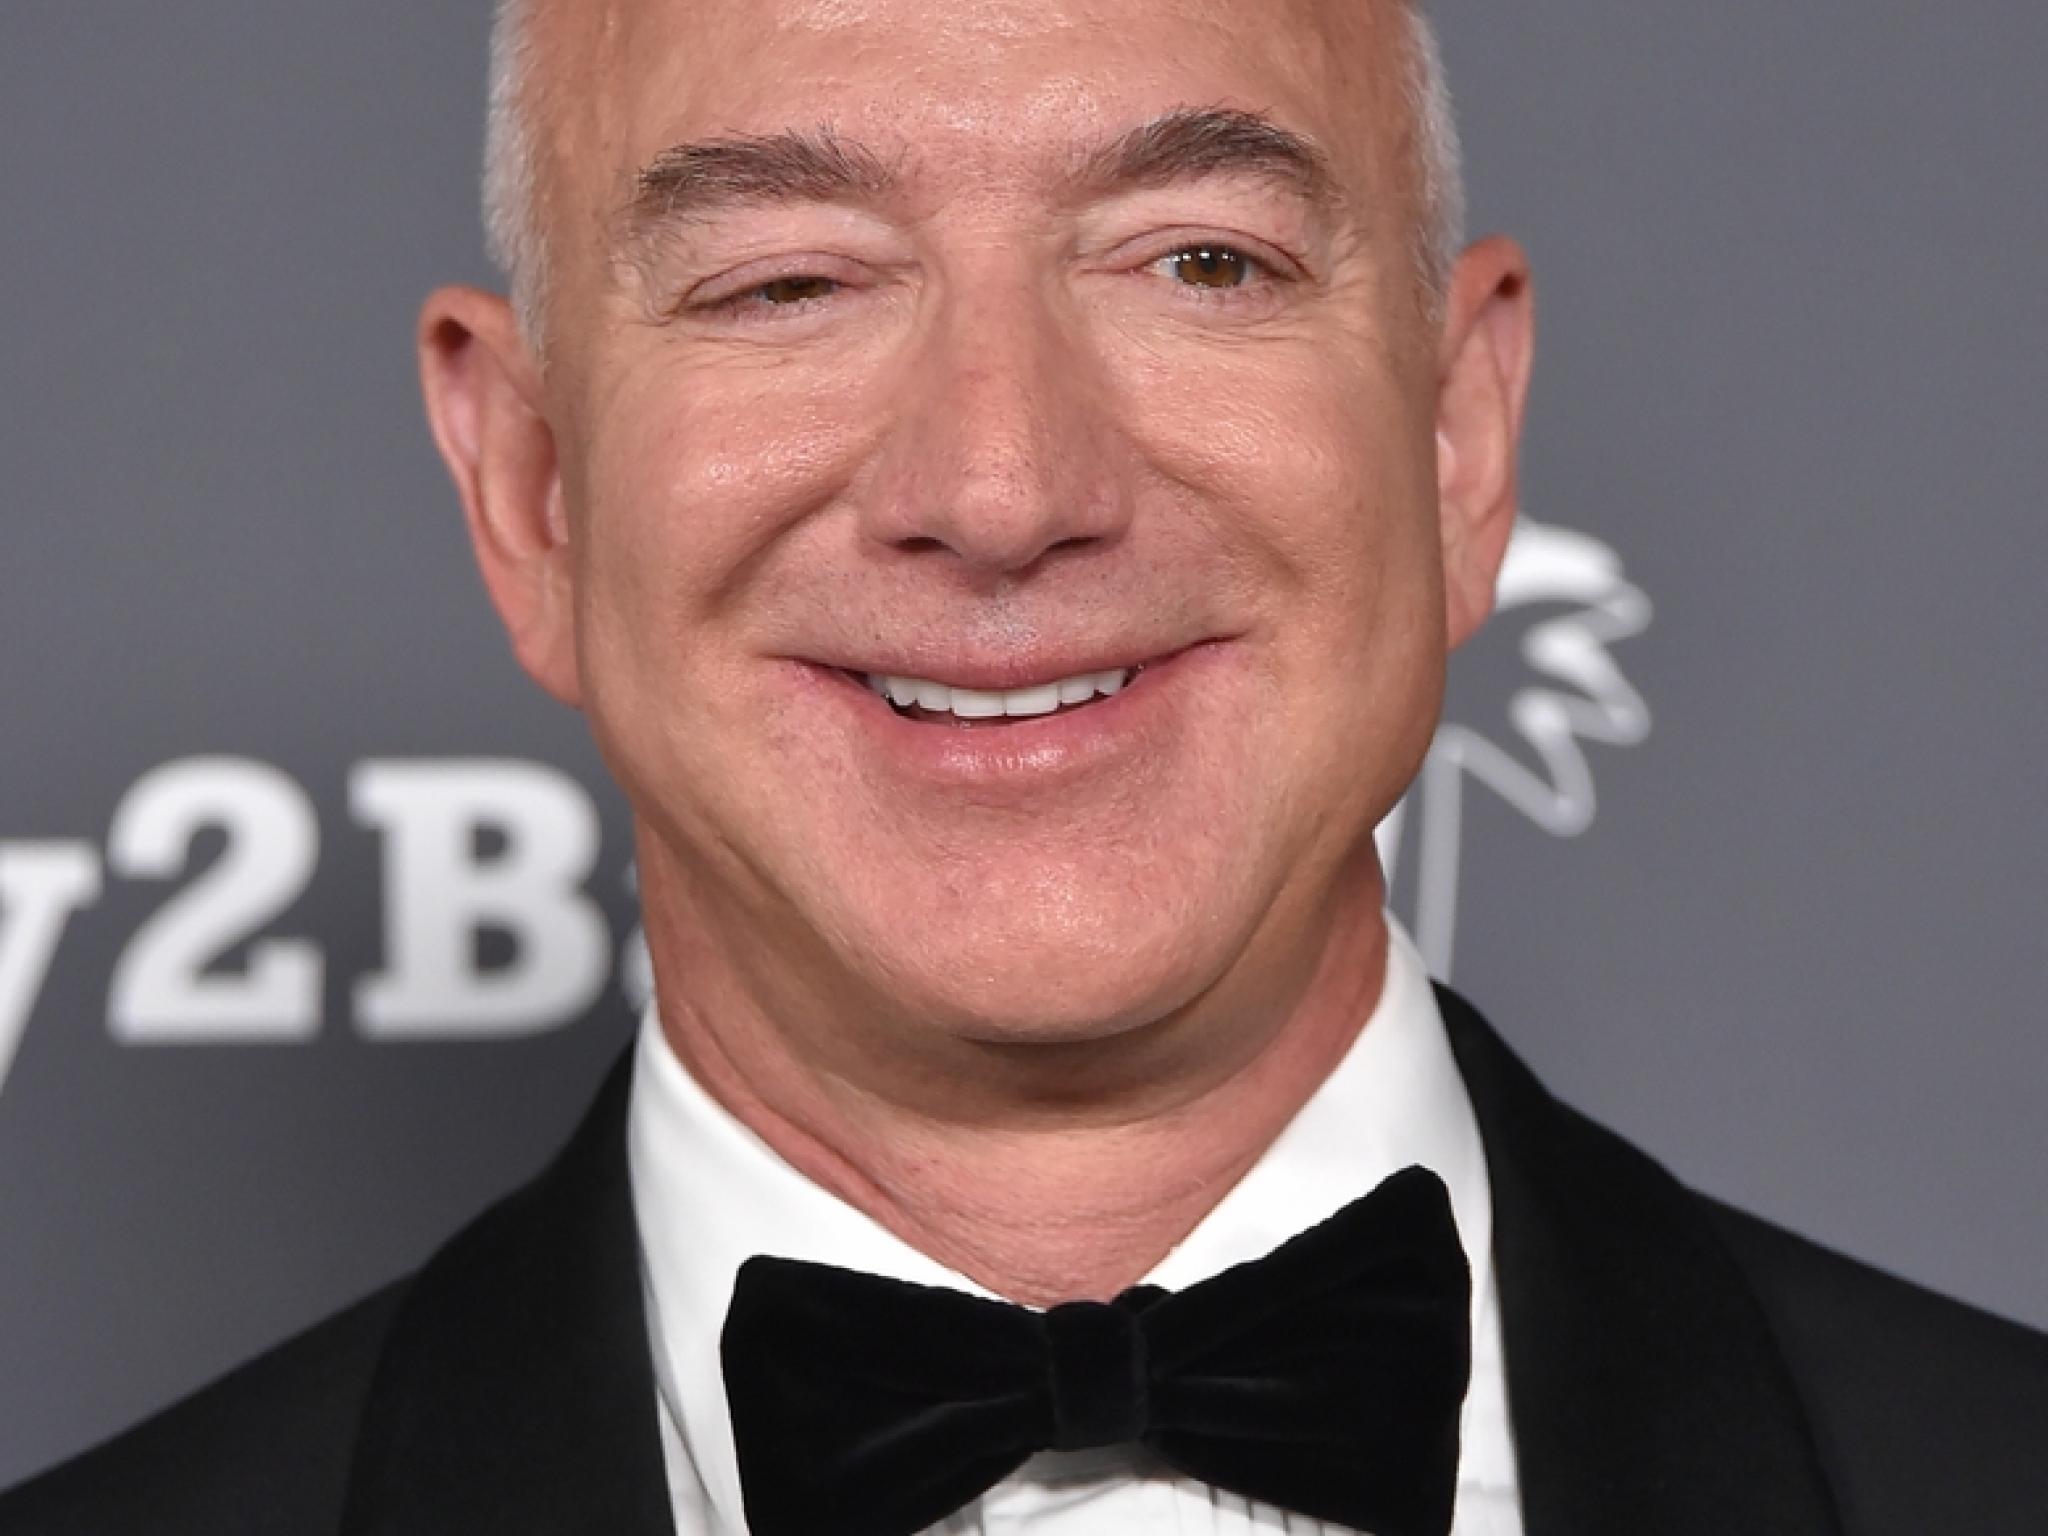  jeff-bezos-reveals-his-unconventional-approach-to-productivity-i-believe-in-wandering 